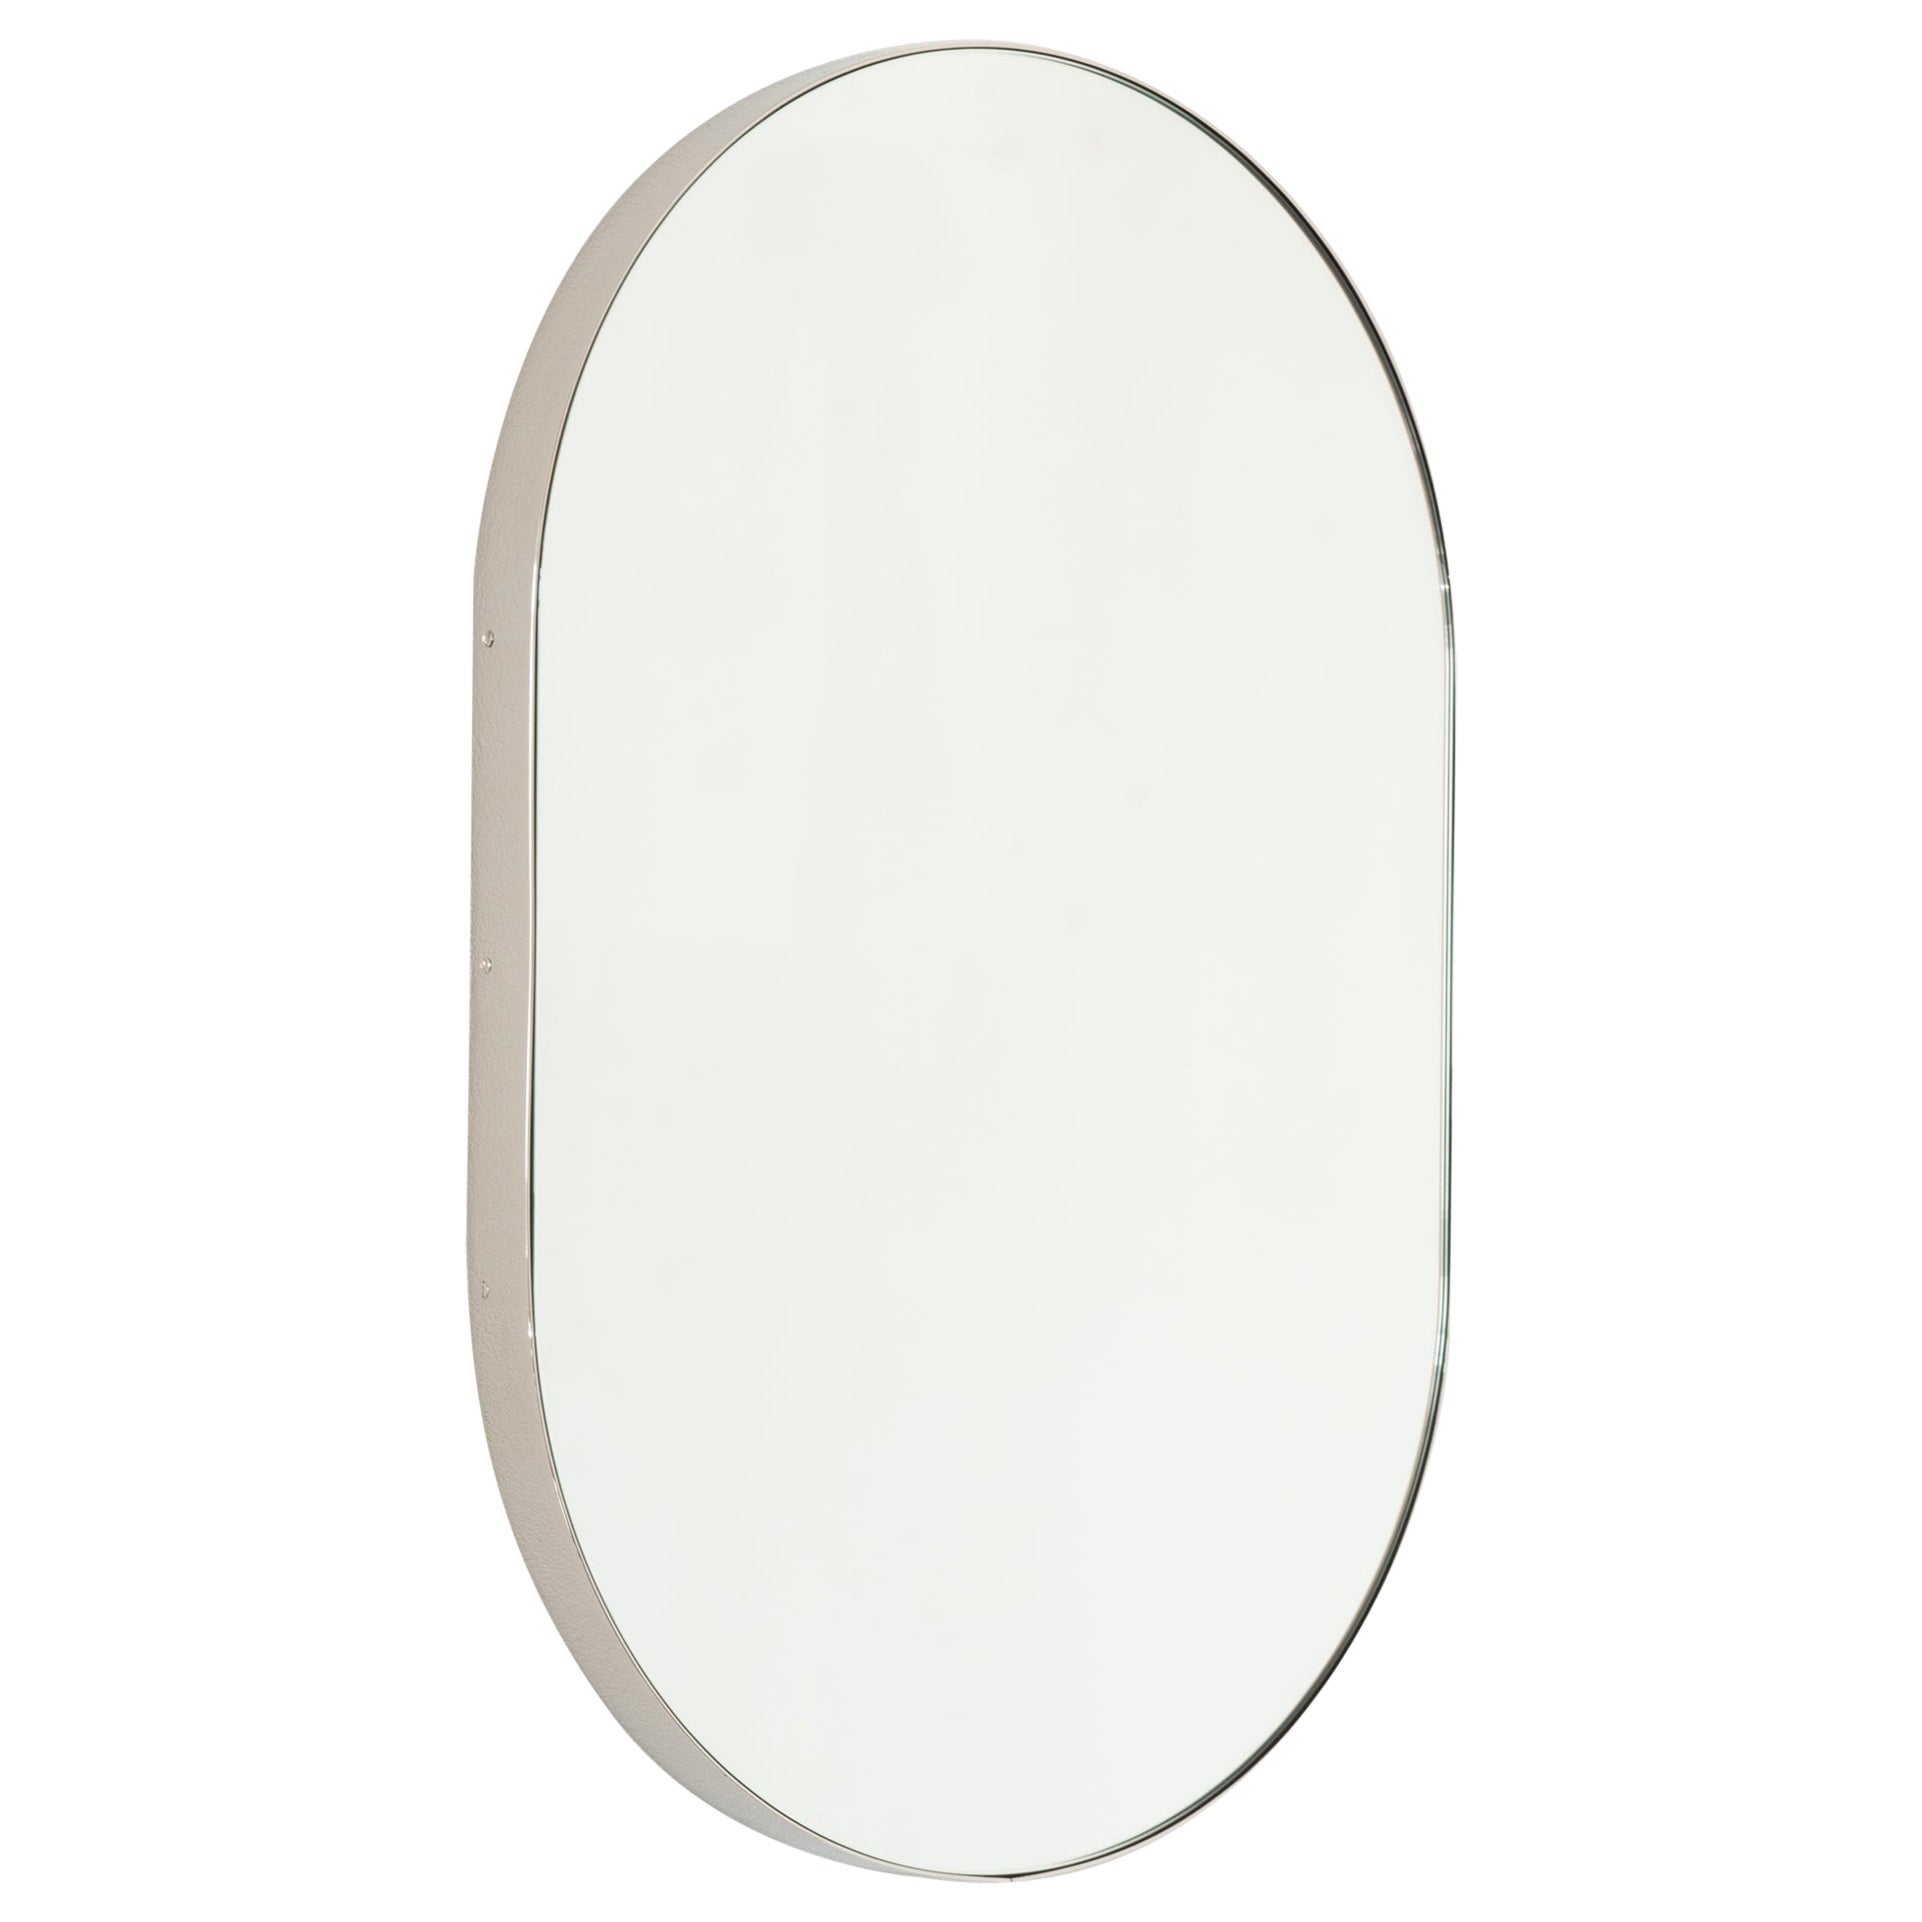 Capsula Pill shaped Customisable Contemporary Mirror, Nickel Plated Frame, Small For Sale